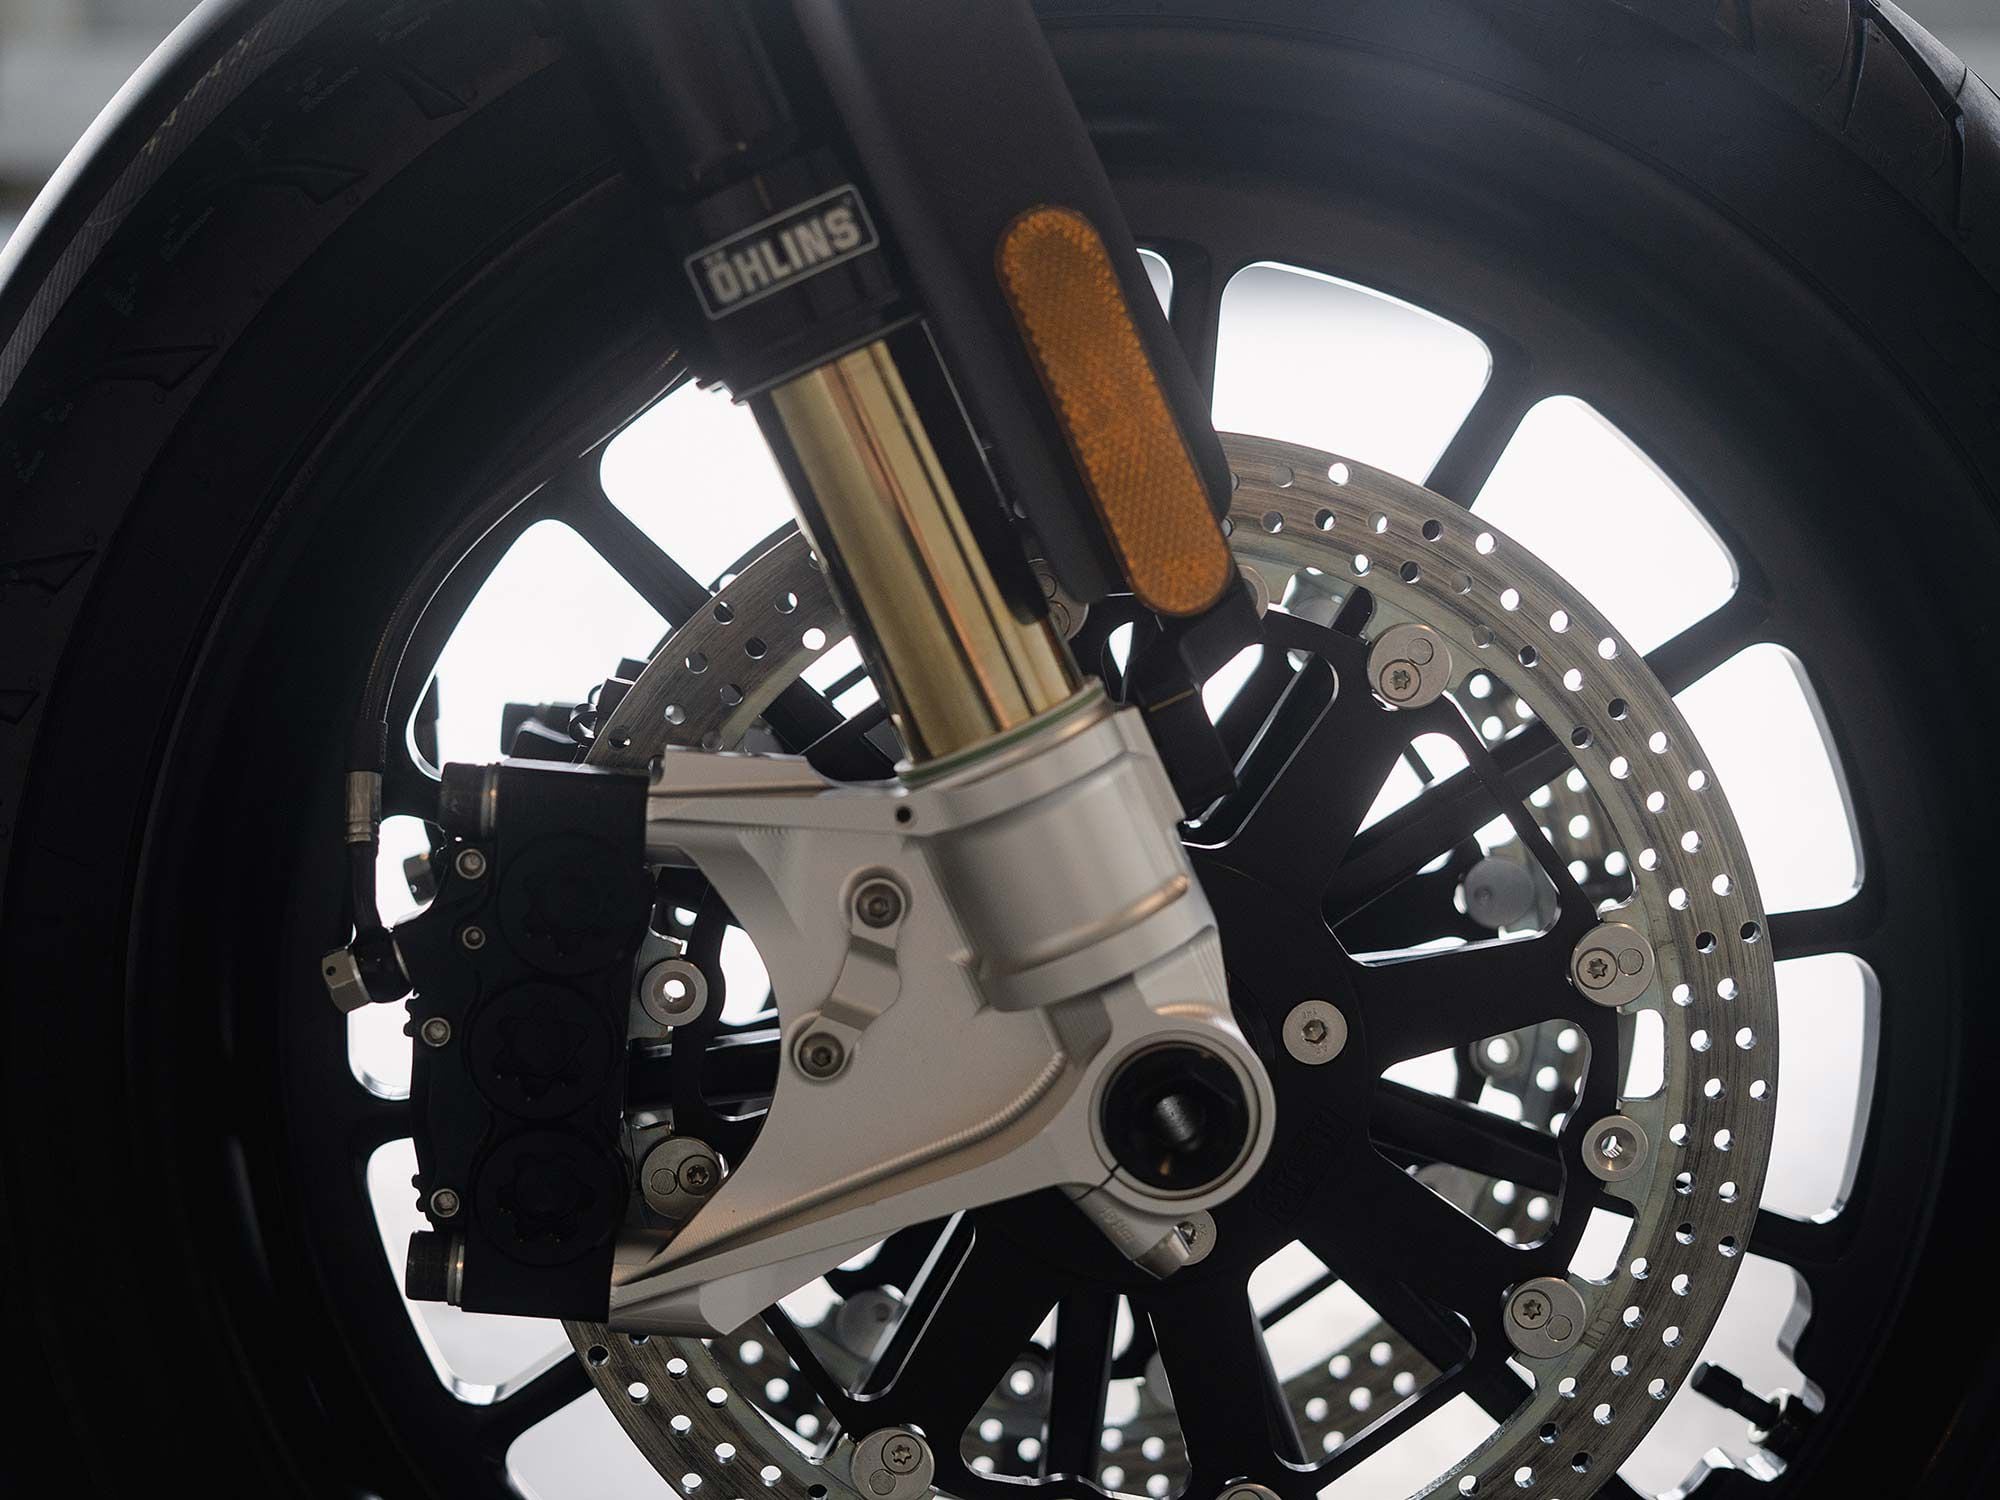 The standard bikes come with Brembo brakes while the limited-run Founder Edition features ISR units.